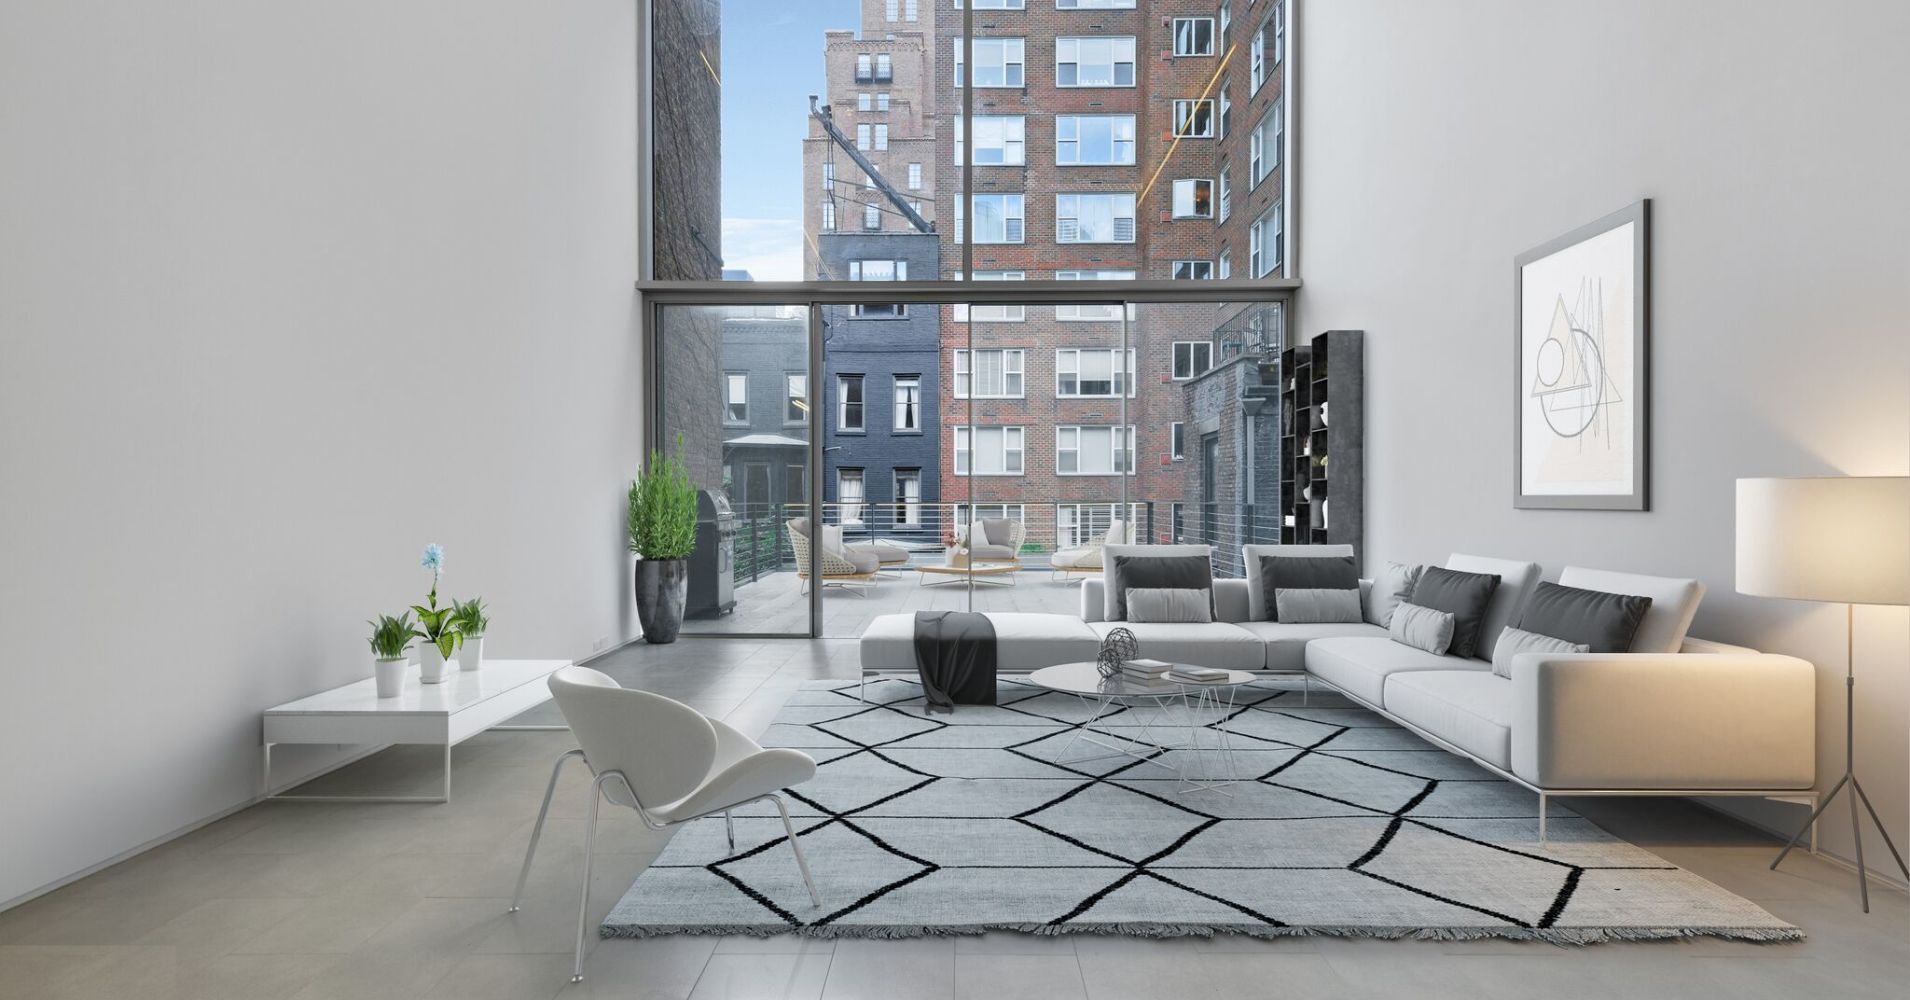 A look inside a $50M New York City house with bulletproof windows that's owned by a billionaire